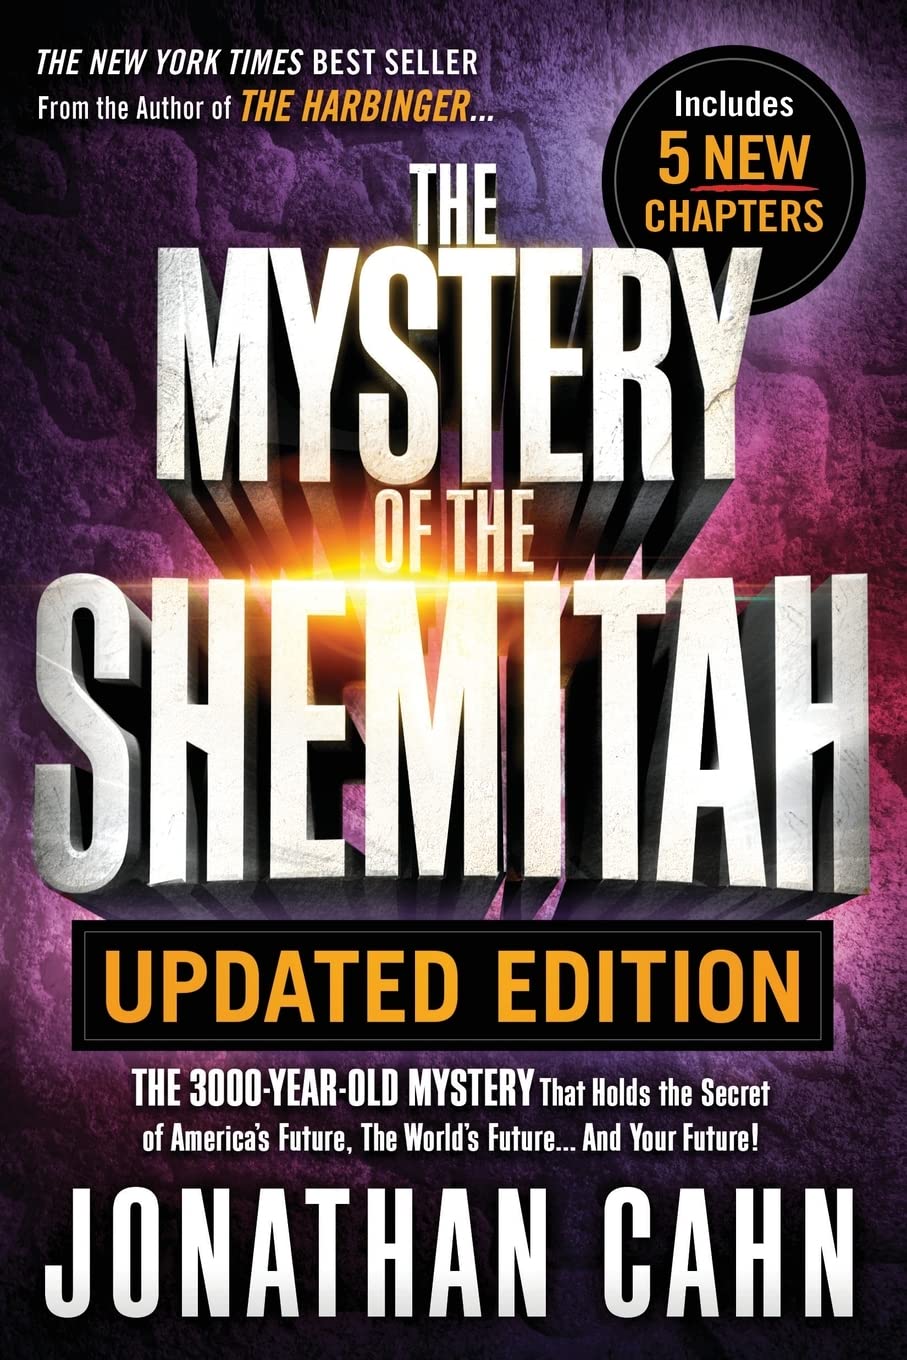 The Mystery of the Shemitah Updated Edition: The 3,000-Year-Old Mystery That Holds the Secret of America’s Future, the World’s Future...and Your Future!